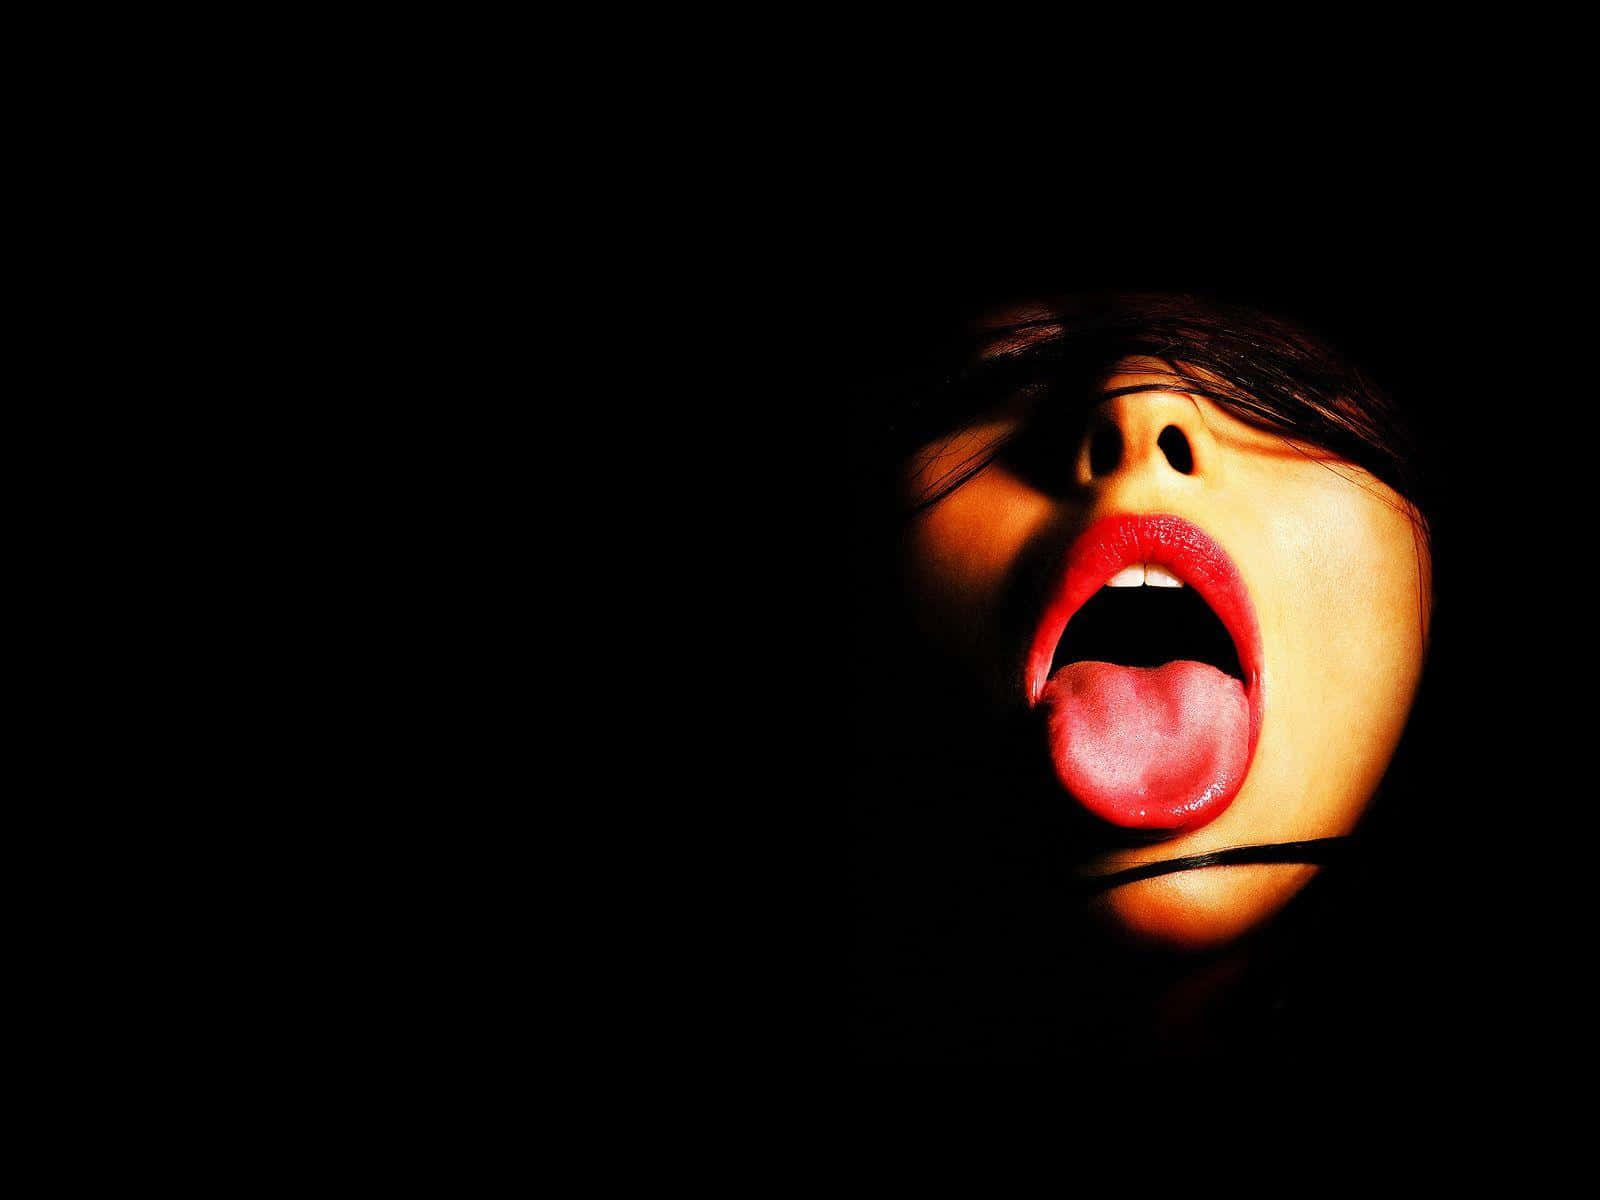 Lick It Tongue Out Cover Photo Background